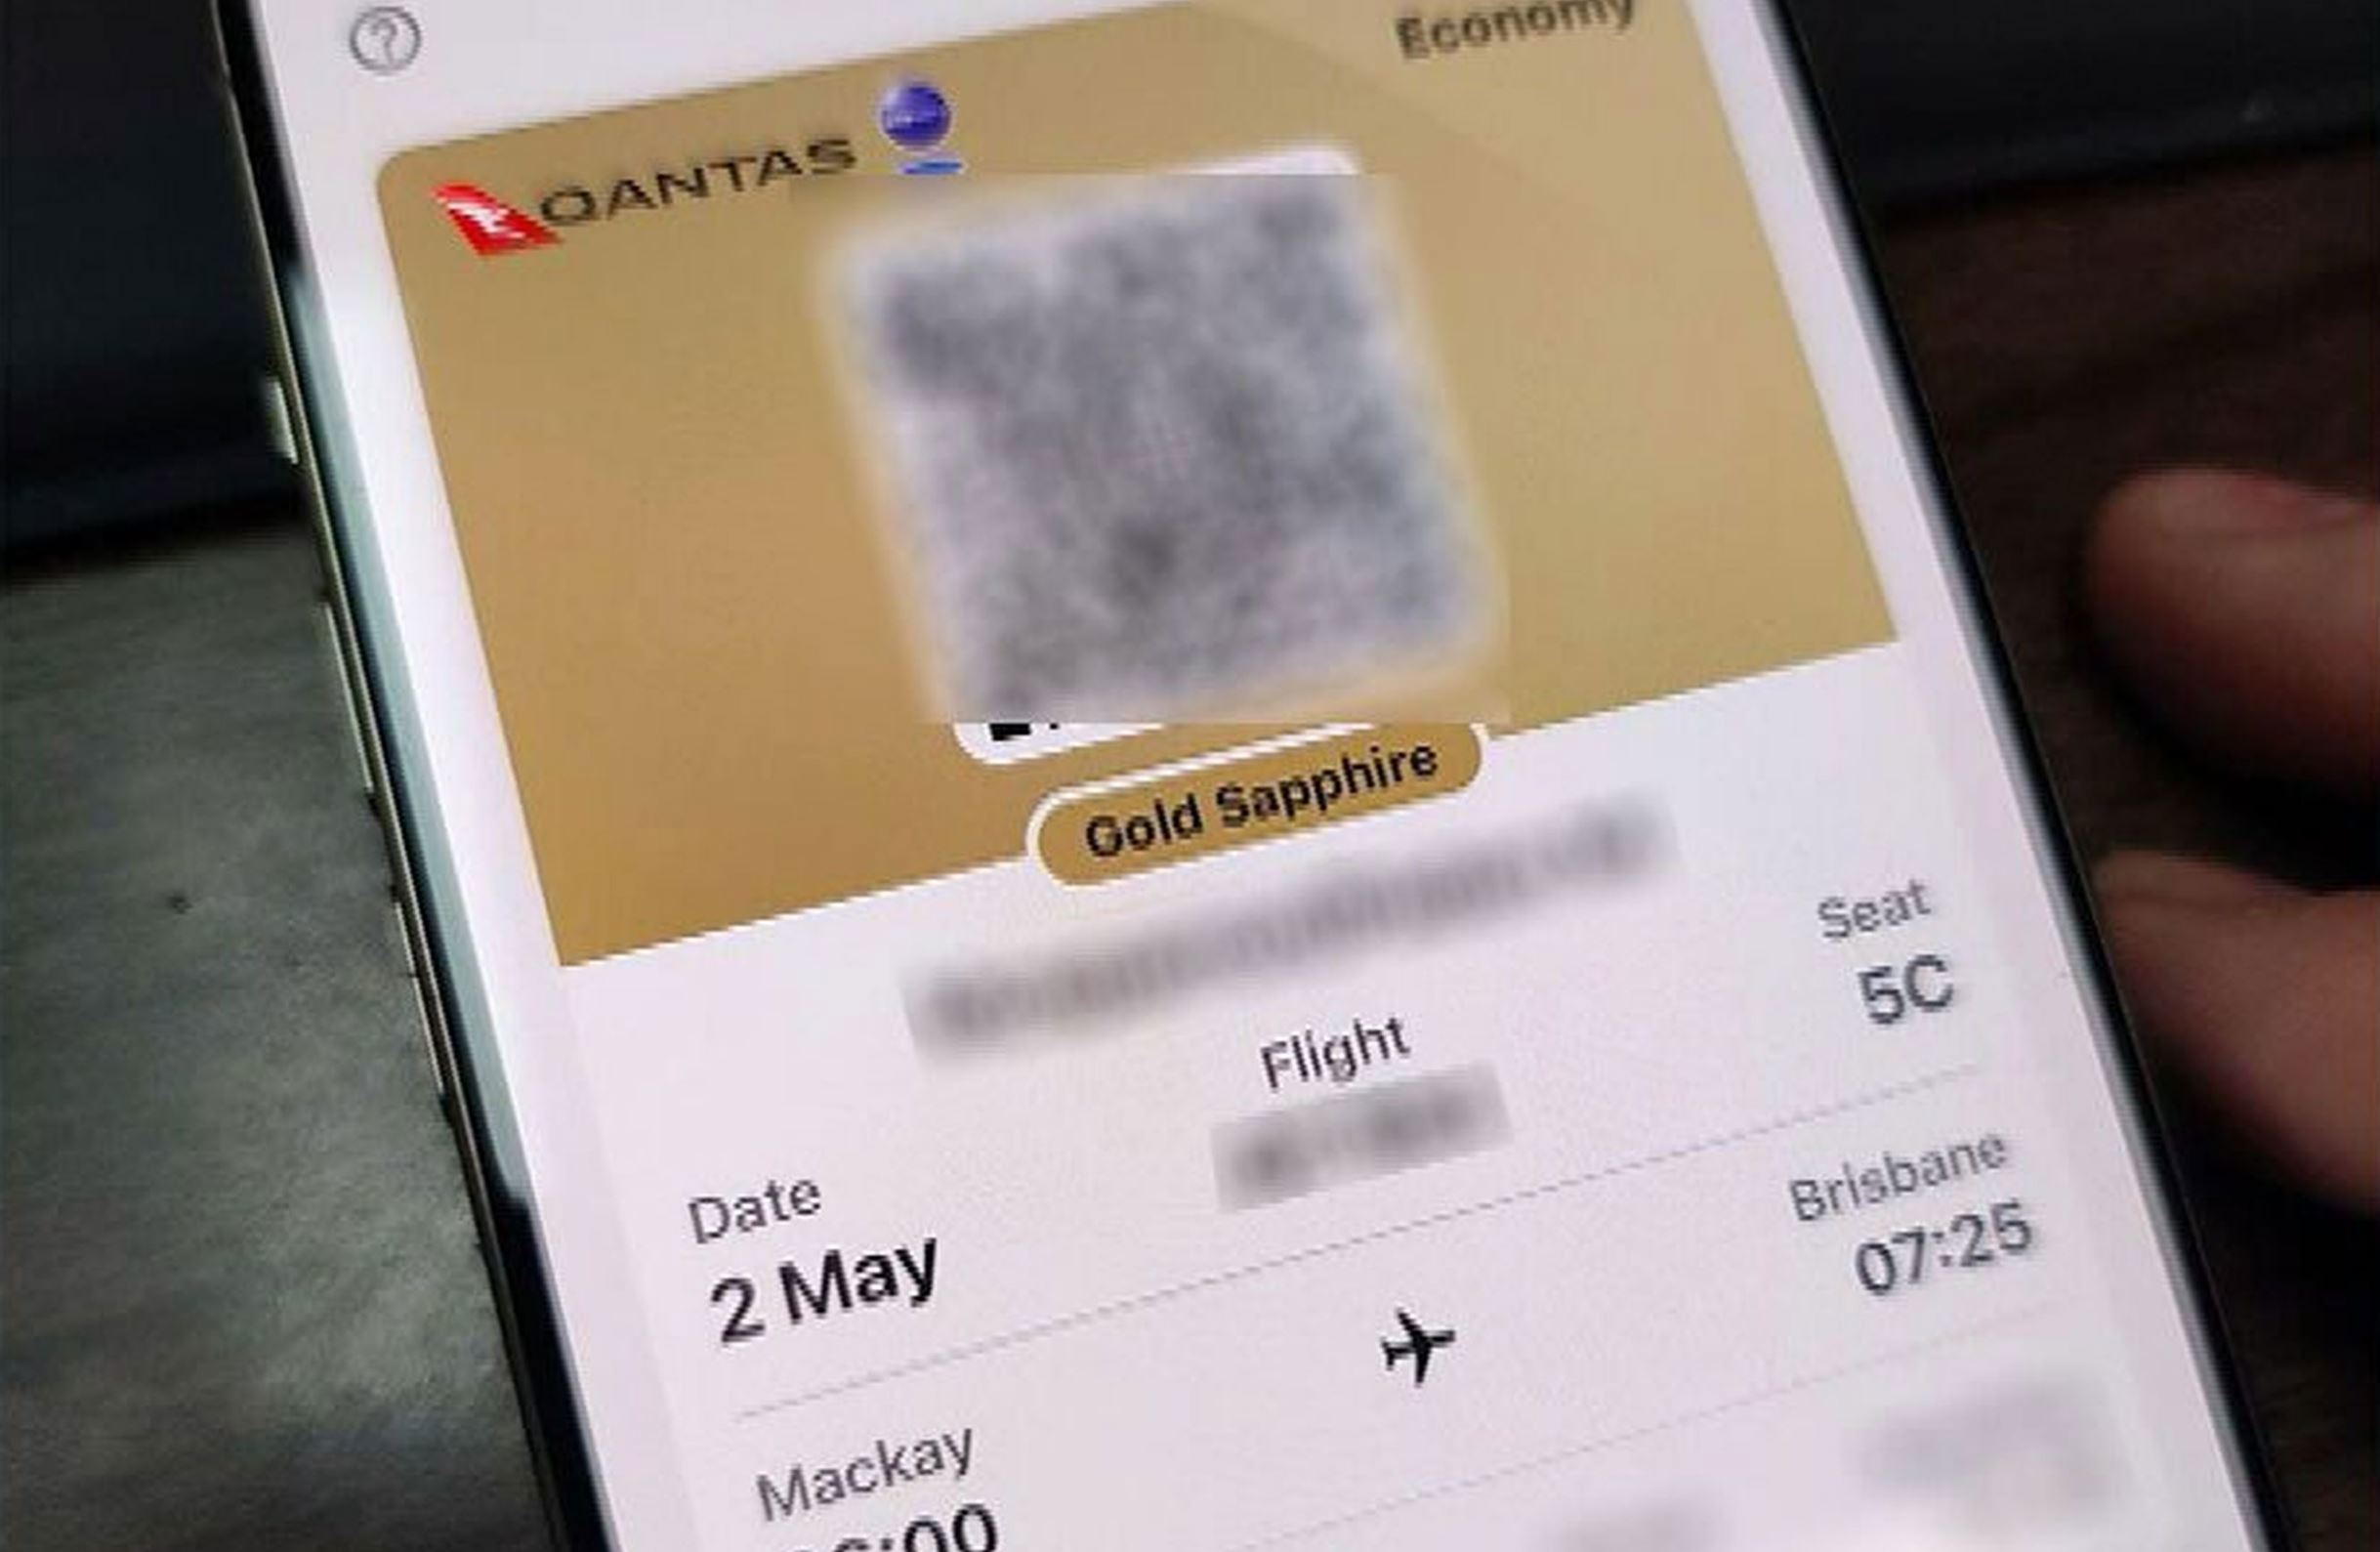 qantas resolves glitch after app users report mass privacy breach